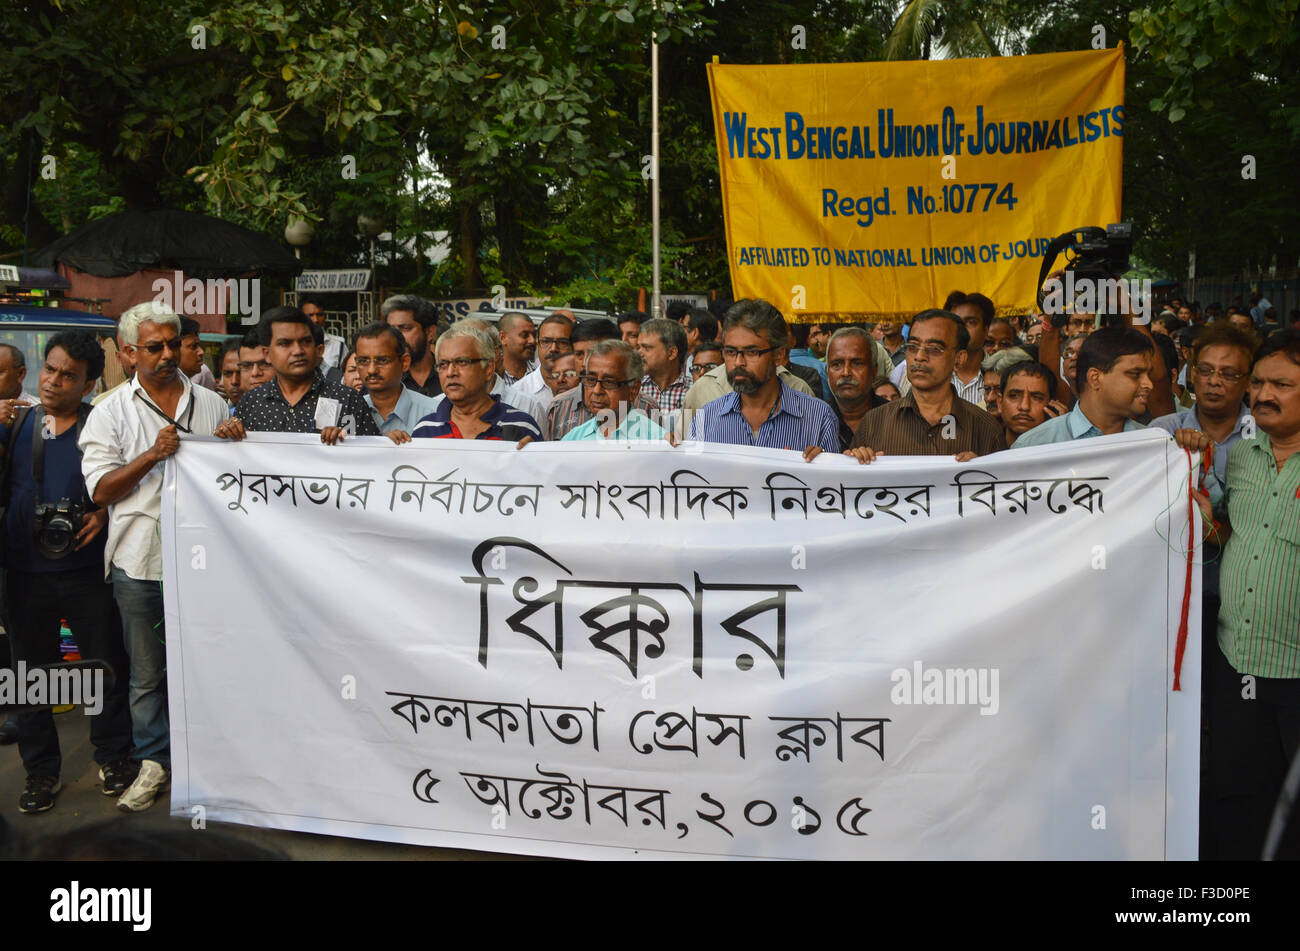 Kolkata, India. 05th Oct, 2015. The Calcutta Press Club organised a rally on Monday to protest the brutal assault on media. There are around thousands of media persons participated in rally to condemn the attack. Photojournalists put their cameras down during protest march at Kolkata. At least 21 journalists were barbarically thrashed and their equipment broken allegedly by goons of ruling Trinamool party while taking reports on rampanr rigging in poll booths across Bidhan Nagar and Salt Lake area. Credit:  PACIFIC PRESS/Alamy Live News Stock Photo